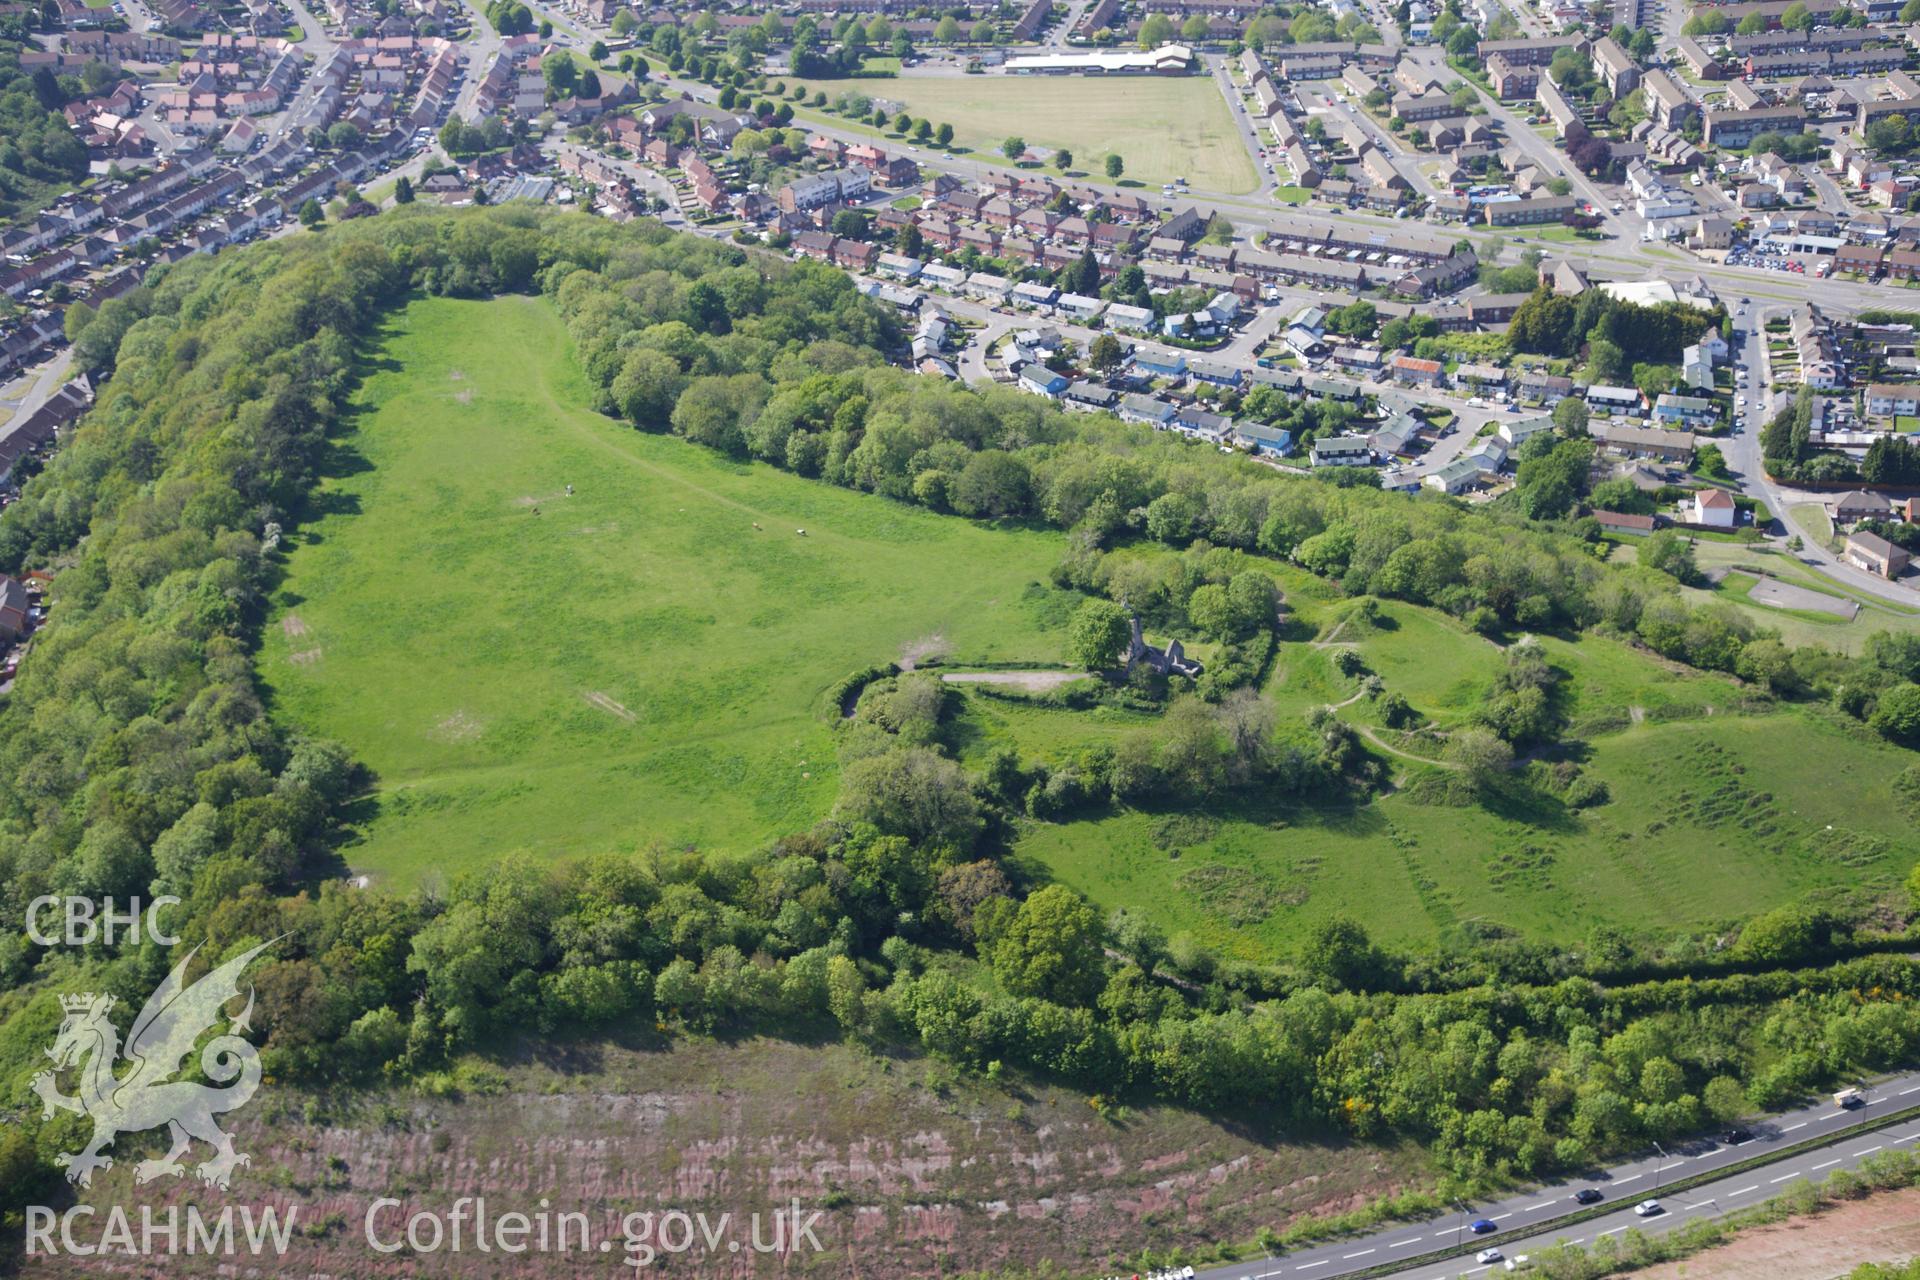 RCAHMW colour oblique photograph of Caerau hillfort viewed from the south-east, with Time Team trenches visible. Taken by Toby Driver on 22/05/2012.